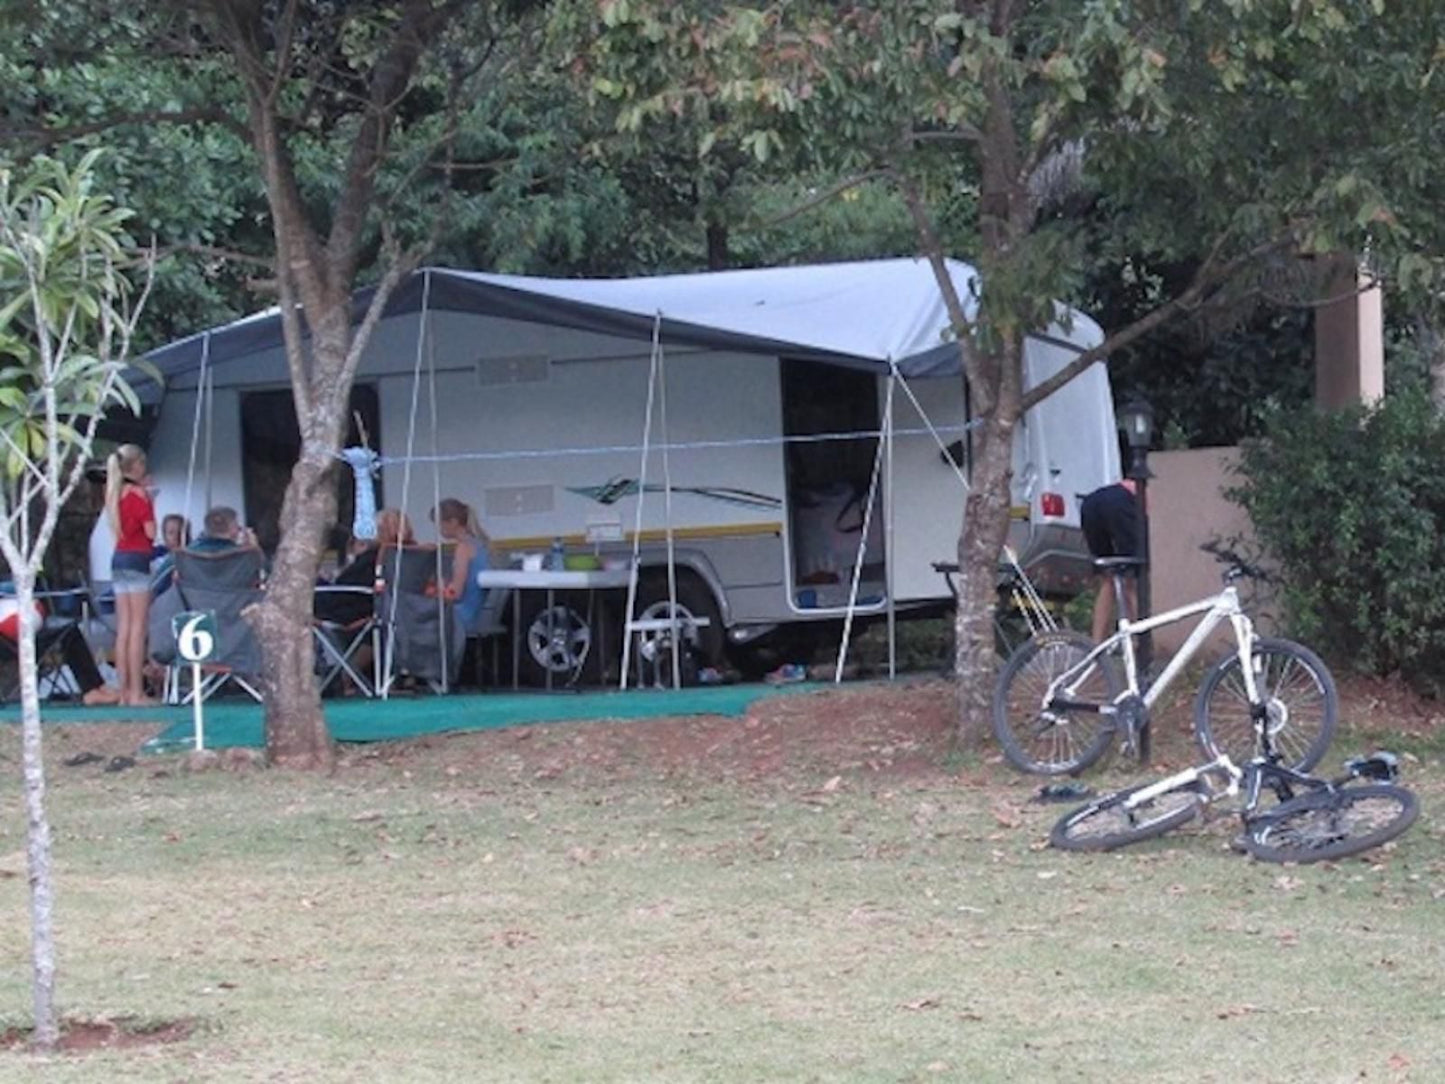 Magoebaskloof Camping Sites Magoebaskloof Limpopo Province South Africa Unsaturated, Tent, Architecture, Vehicle, Bicycle